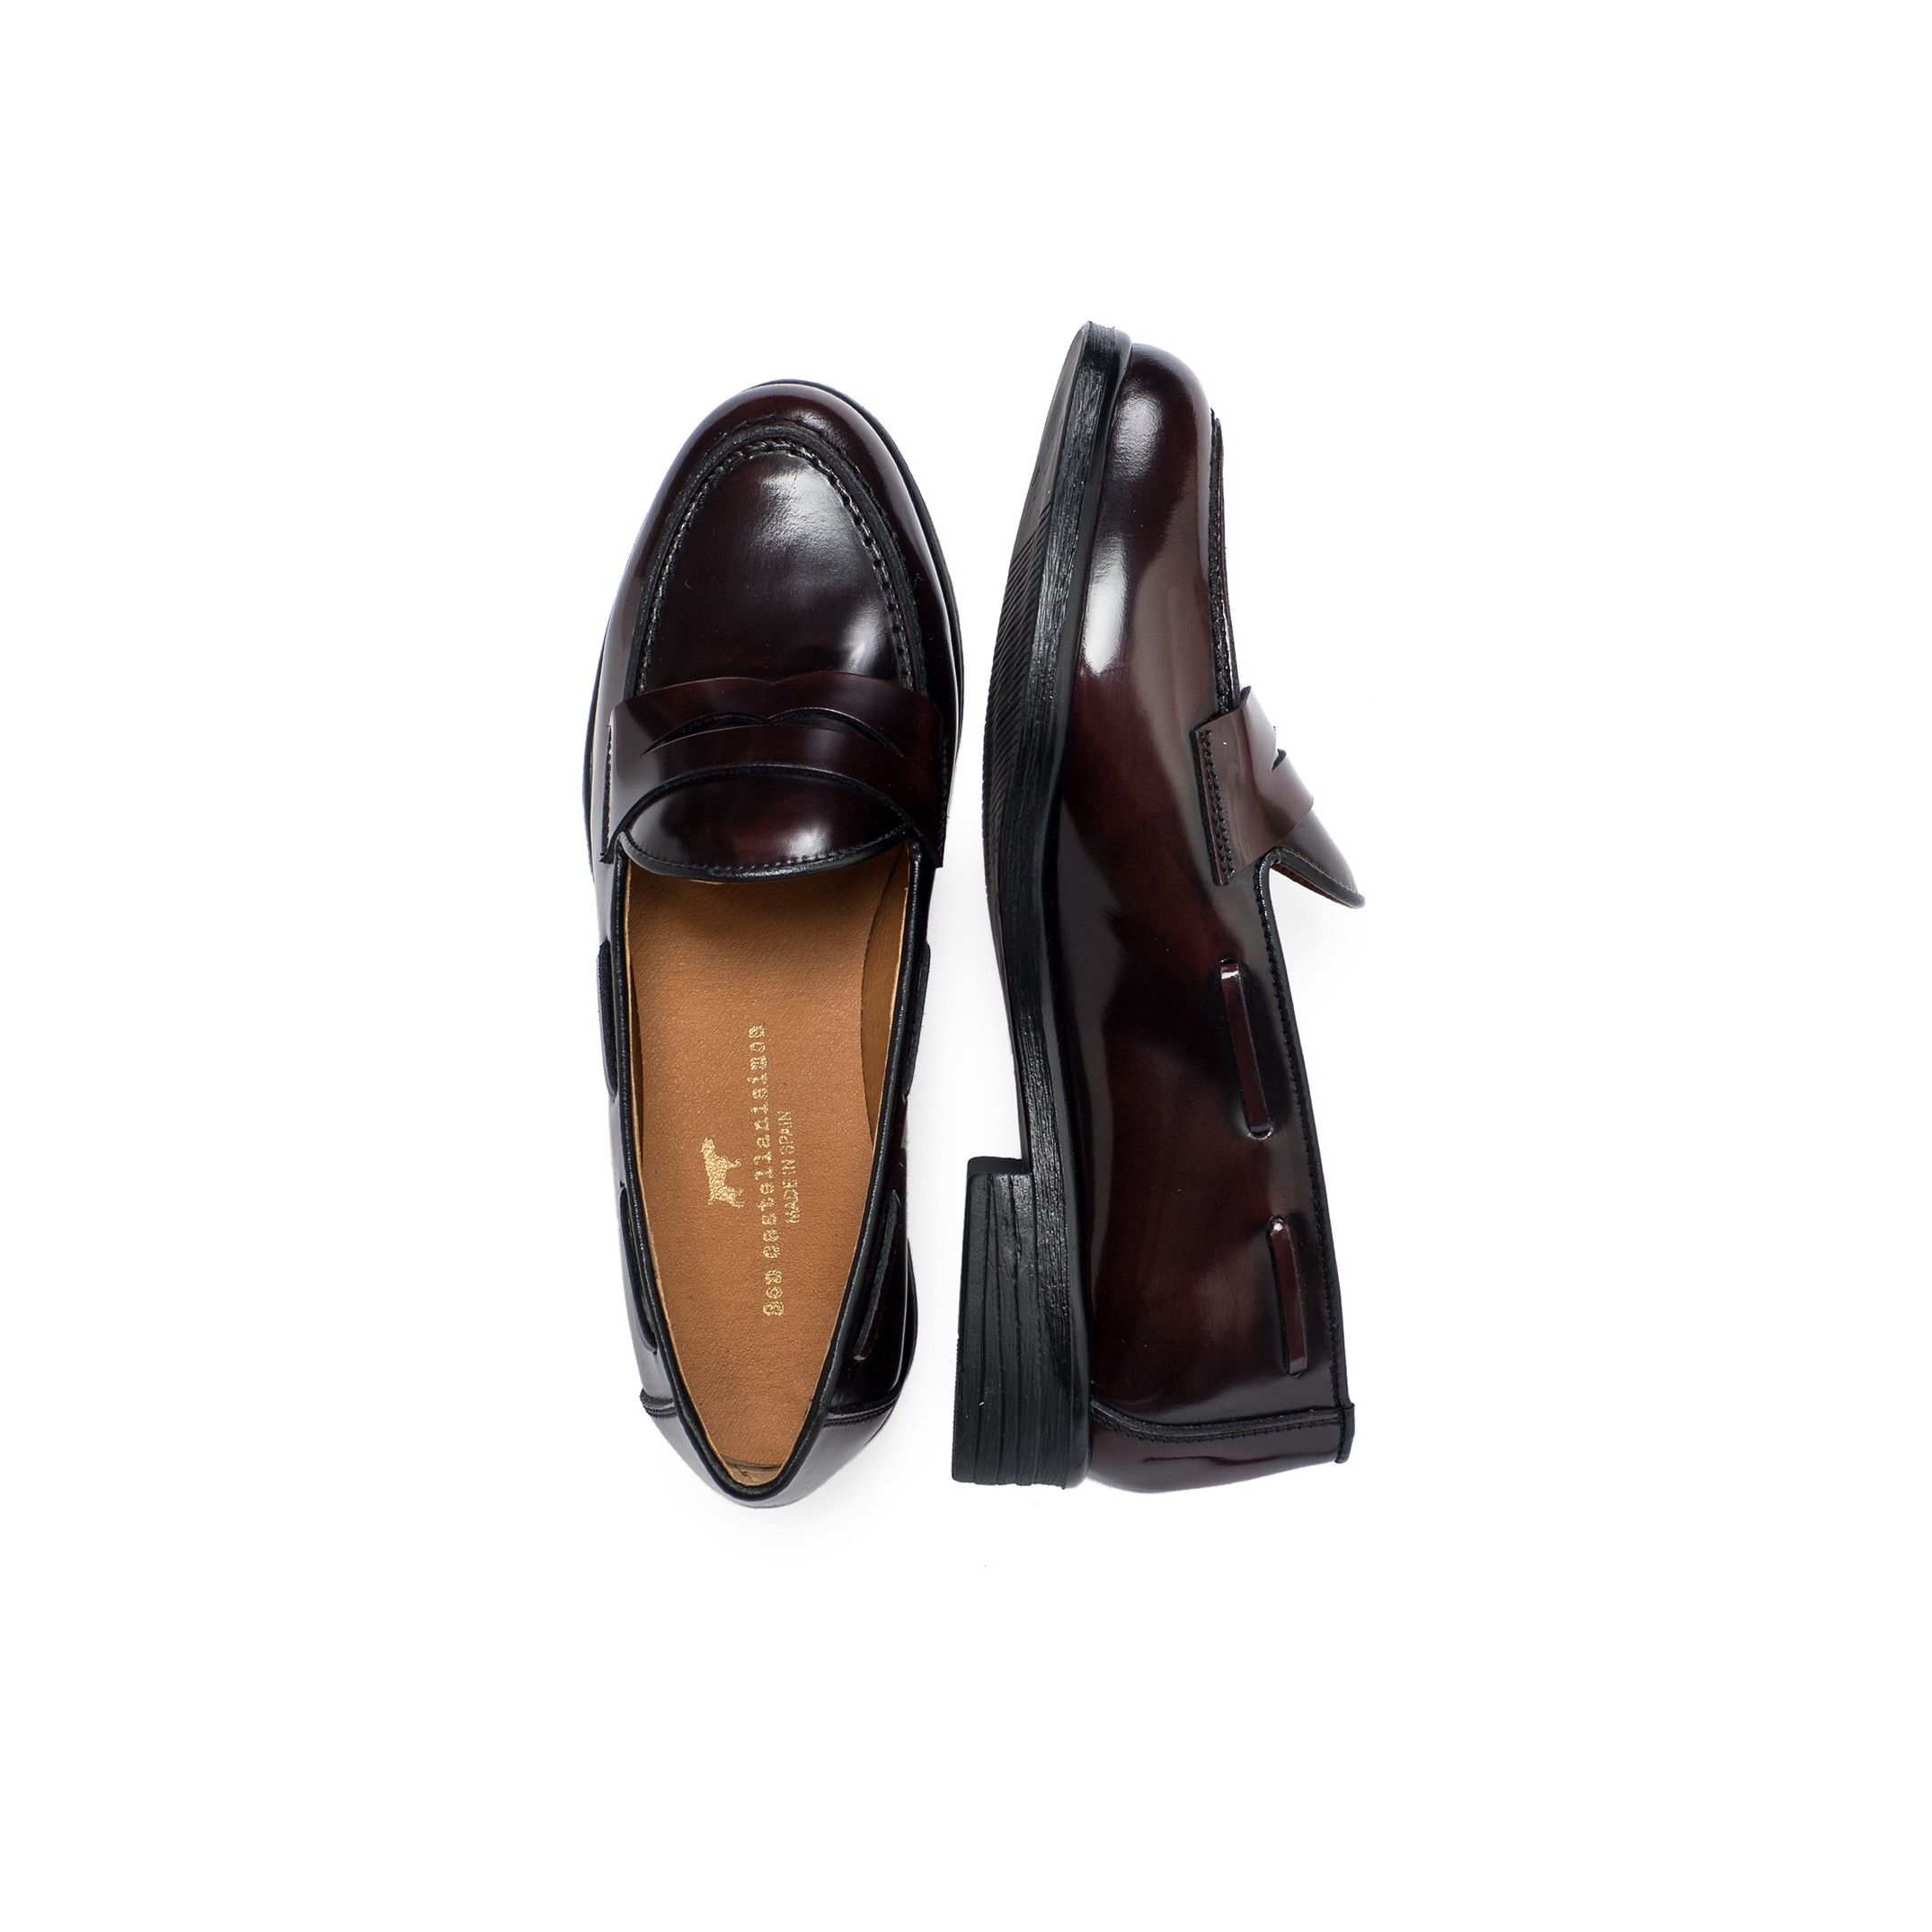 Leather loafers with mask for women, by Son Castellanisimos. Upper made of cowhide of leather. Inner lining and insole: Antiallergic and keeps the inside of the footwear dry. Sole material: synthetic and non slip. Heel height: 2,5 cm. Designed and made in Spain.